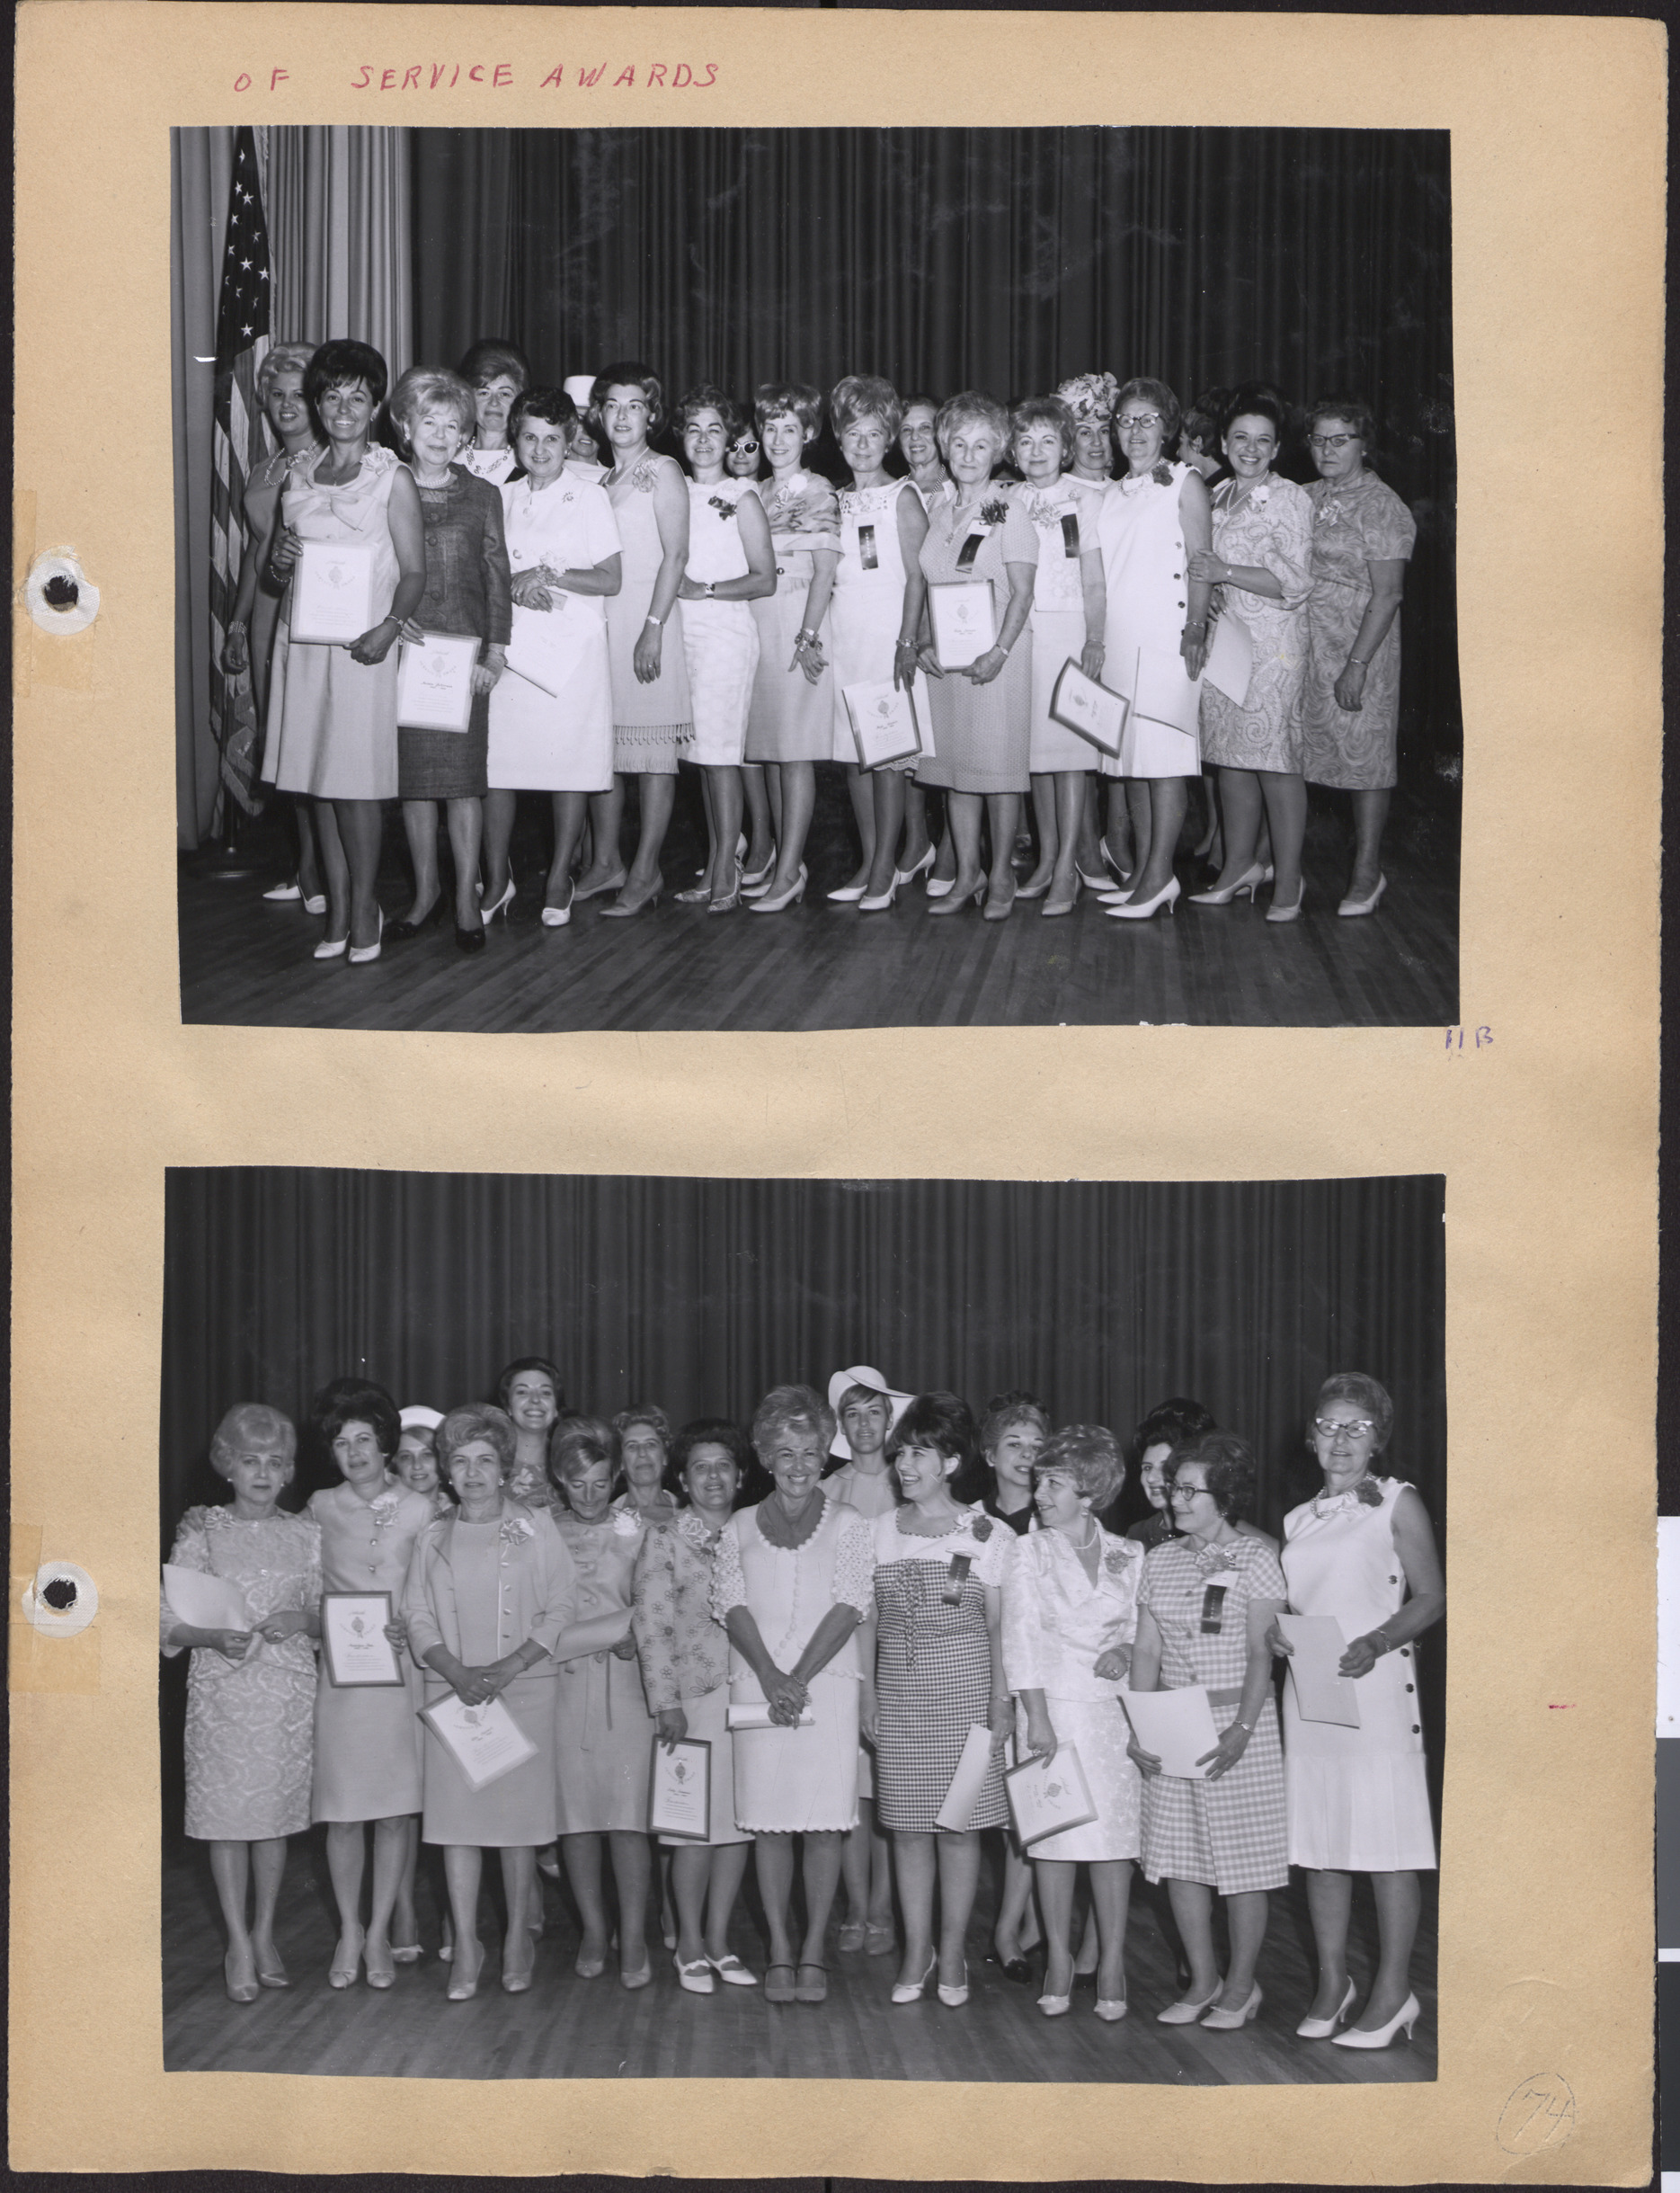 Photographs of Hadassah's Second Donor Luncheon Service Award Recipients, May 16, 1966